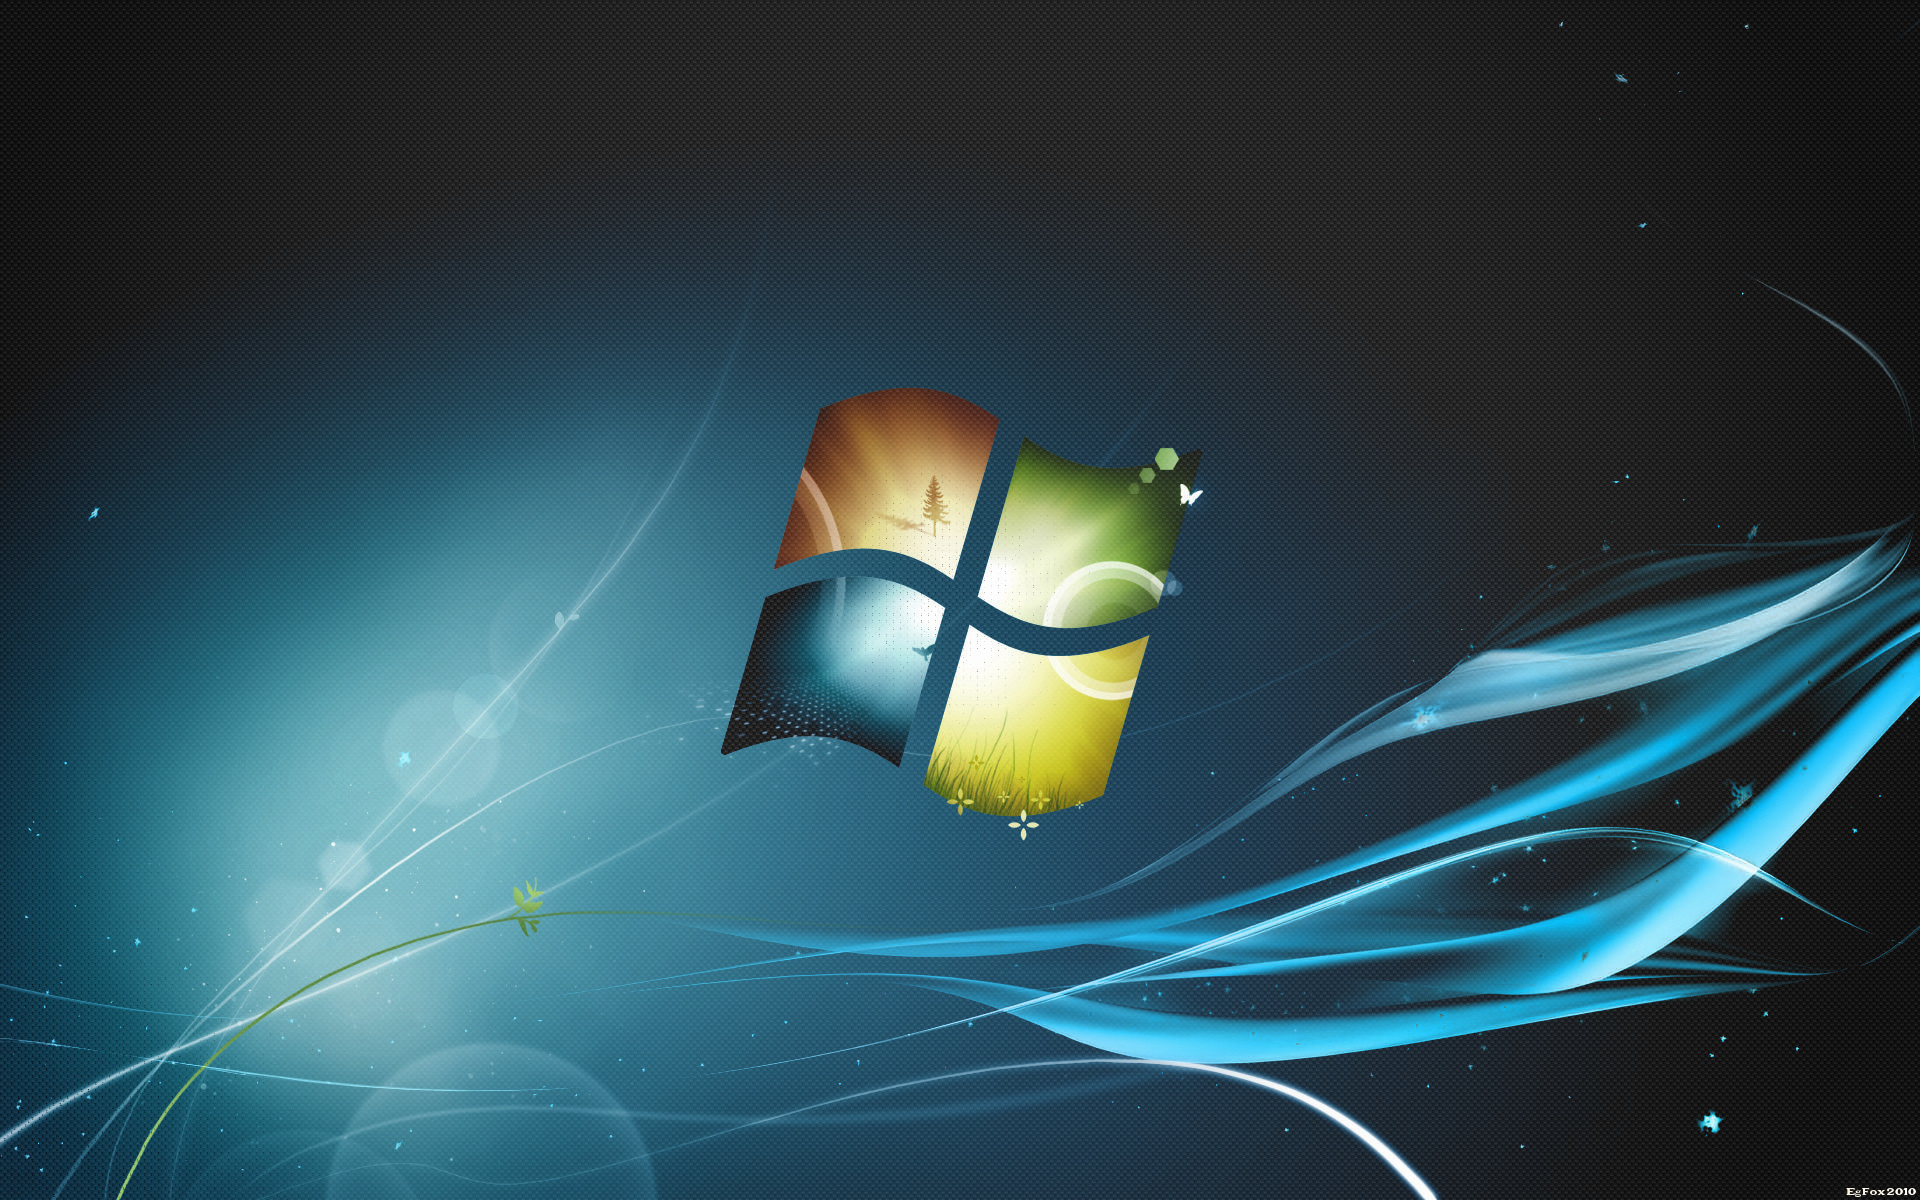 windows 7 backgrounds hd wallpapers windows 7 backgrounds hd